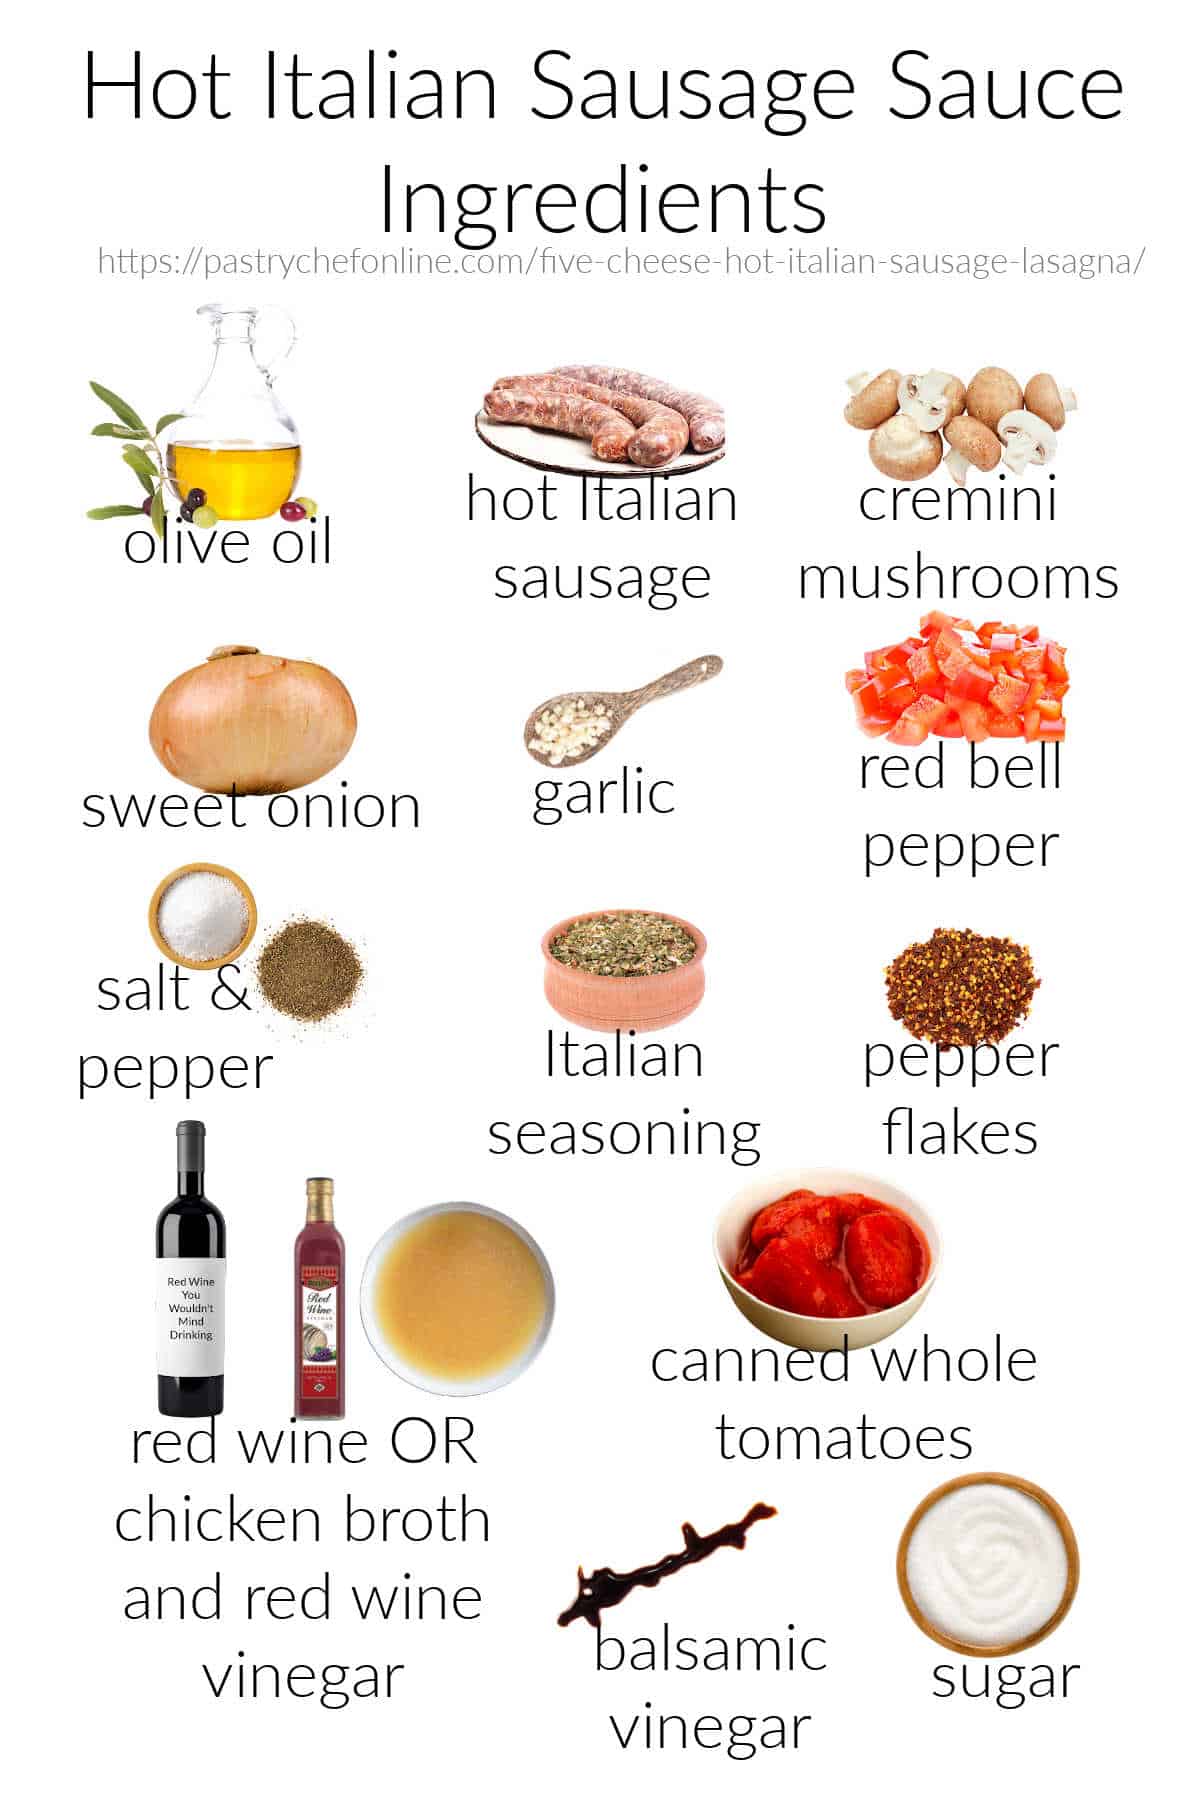 A collage of labeled ingredient images needed to make hot Italian sausage sauce.